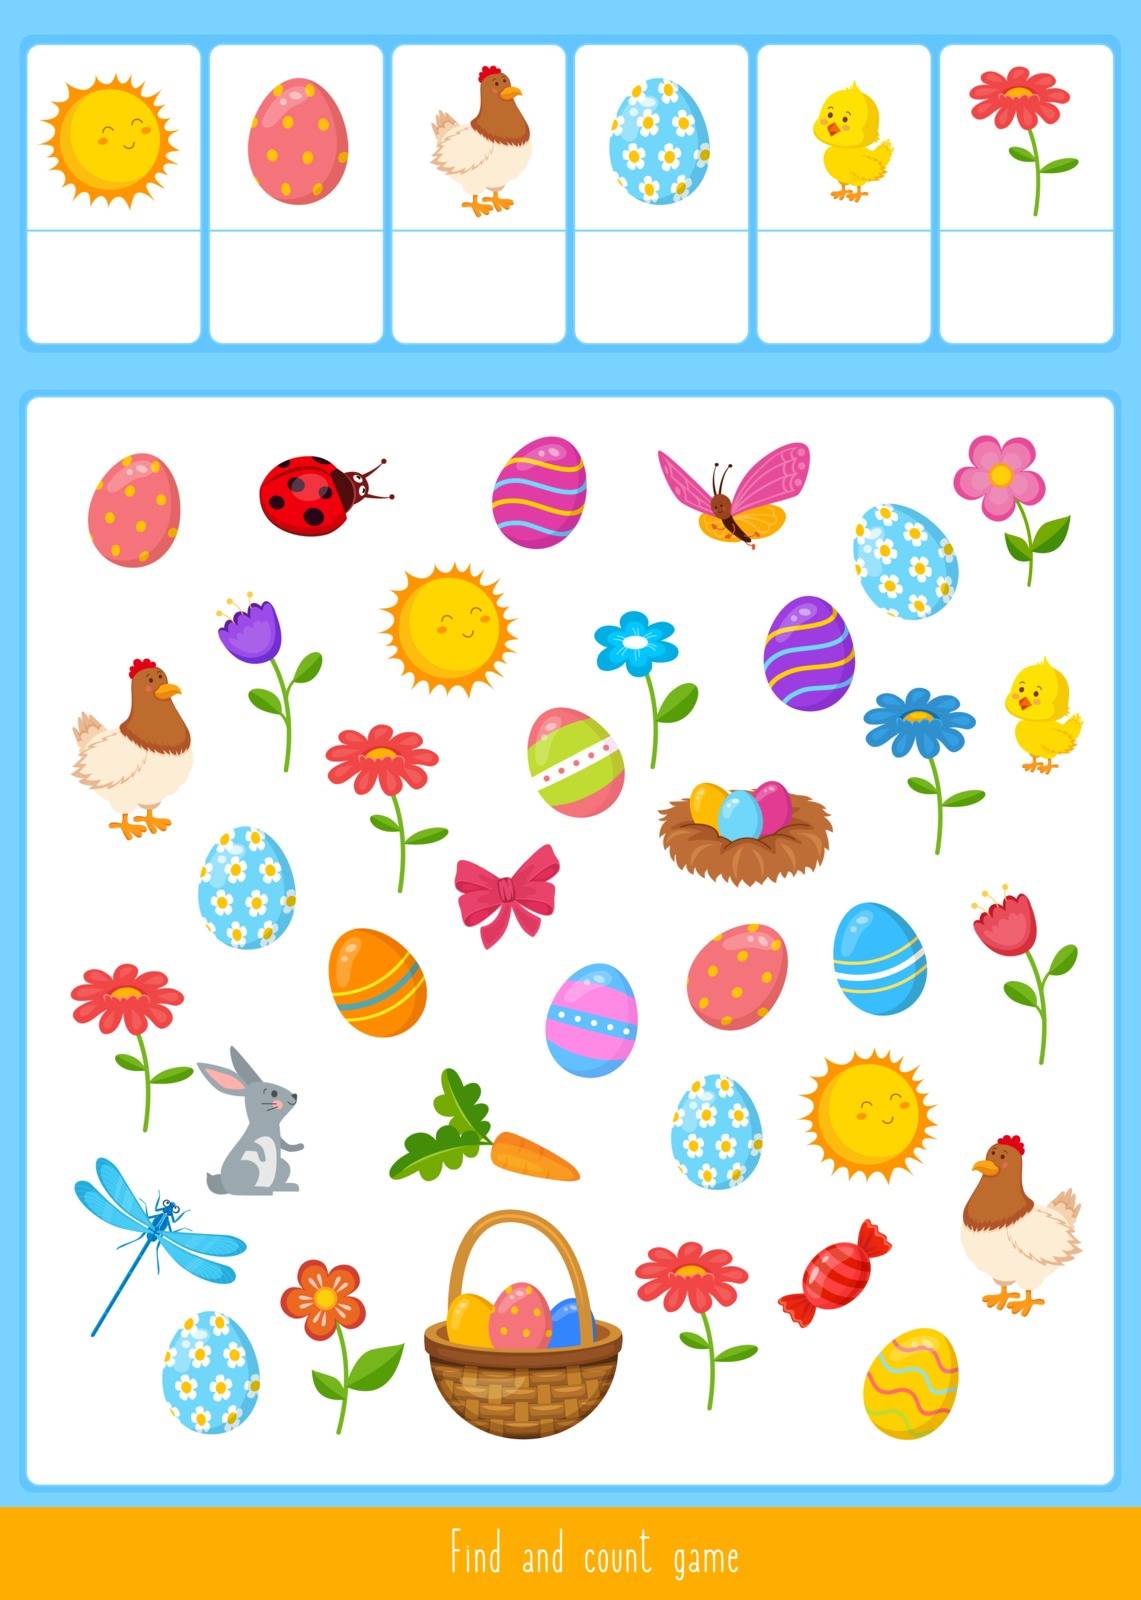 Educational children game, vector illustration.  Easter found and count.